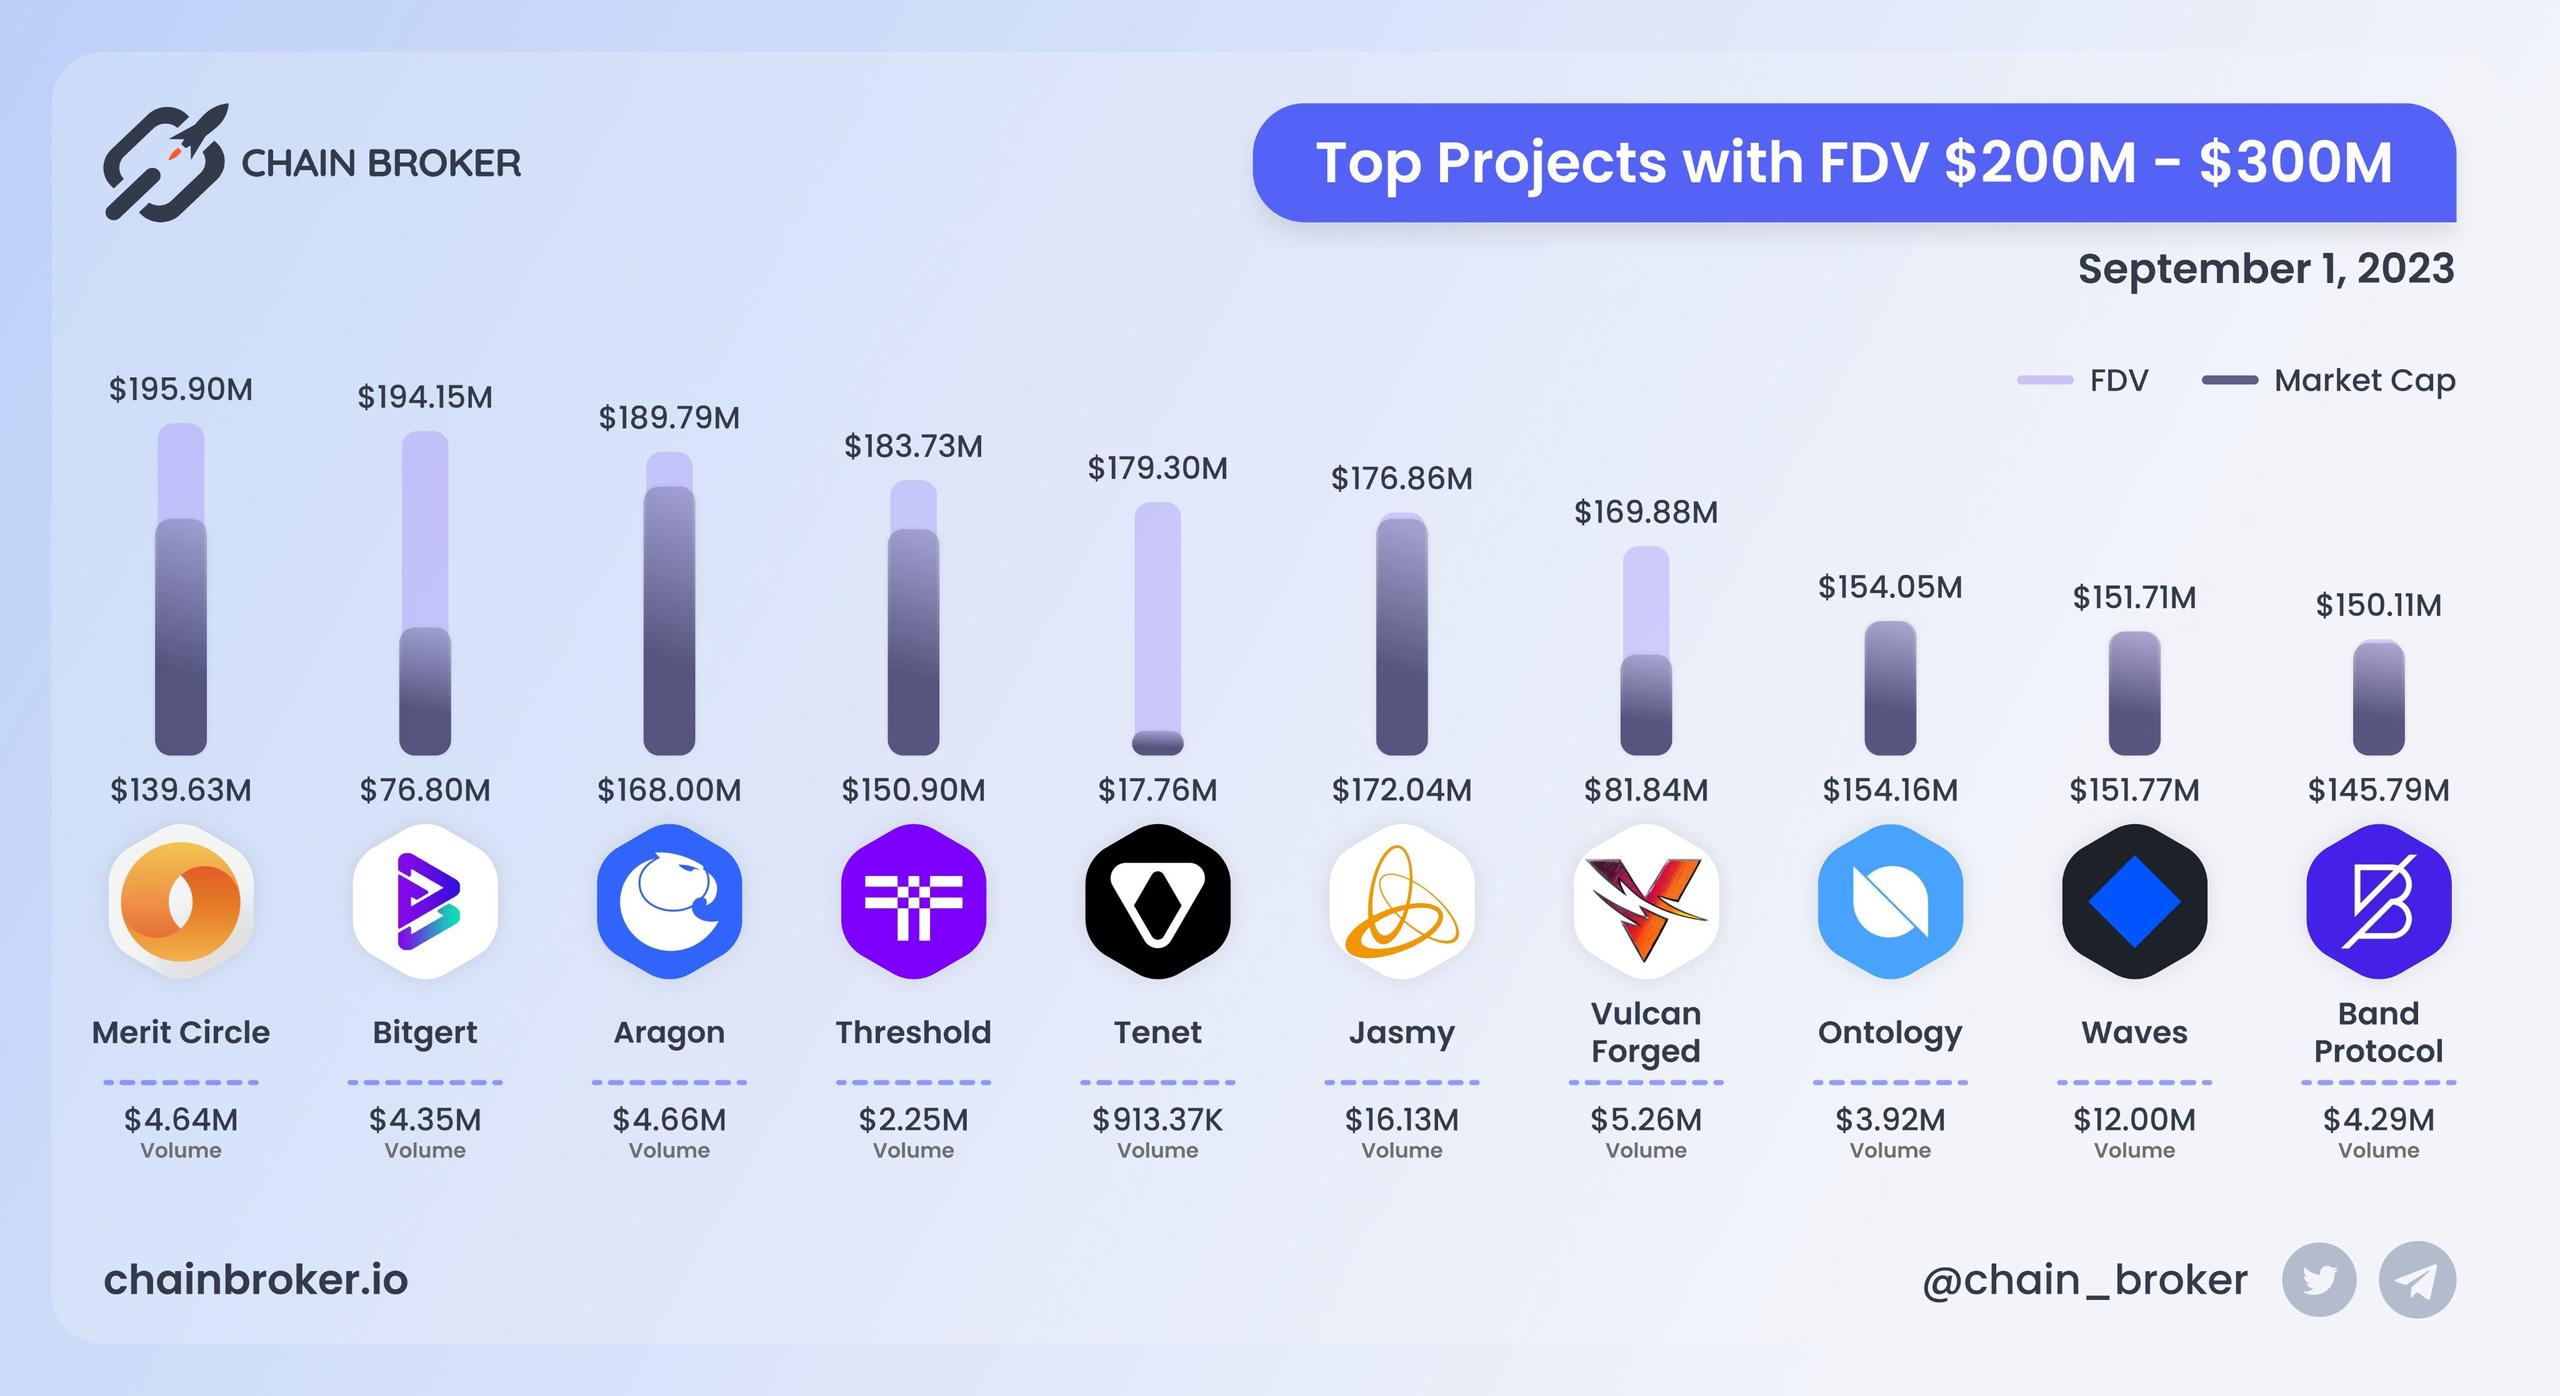 Top projects with FDV $200M - $300M